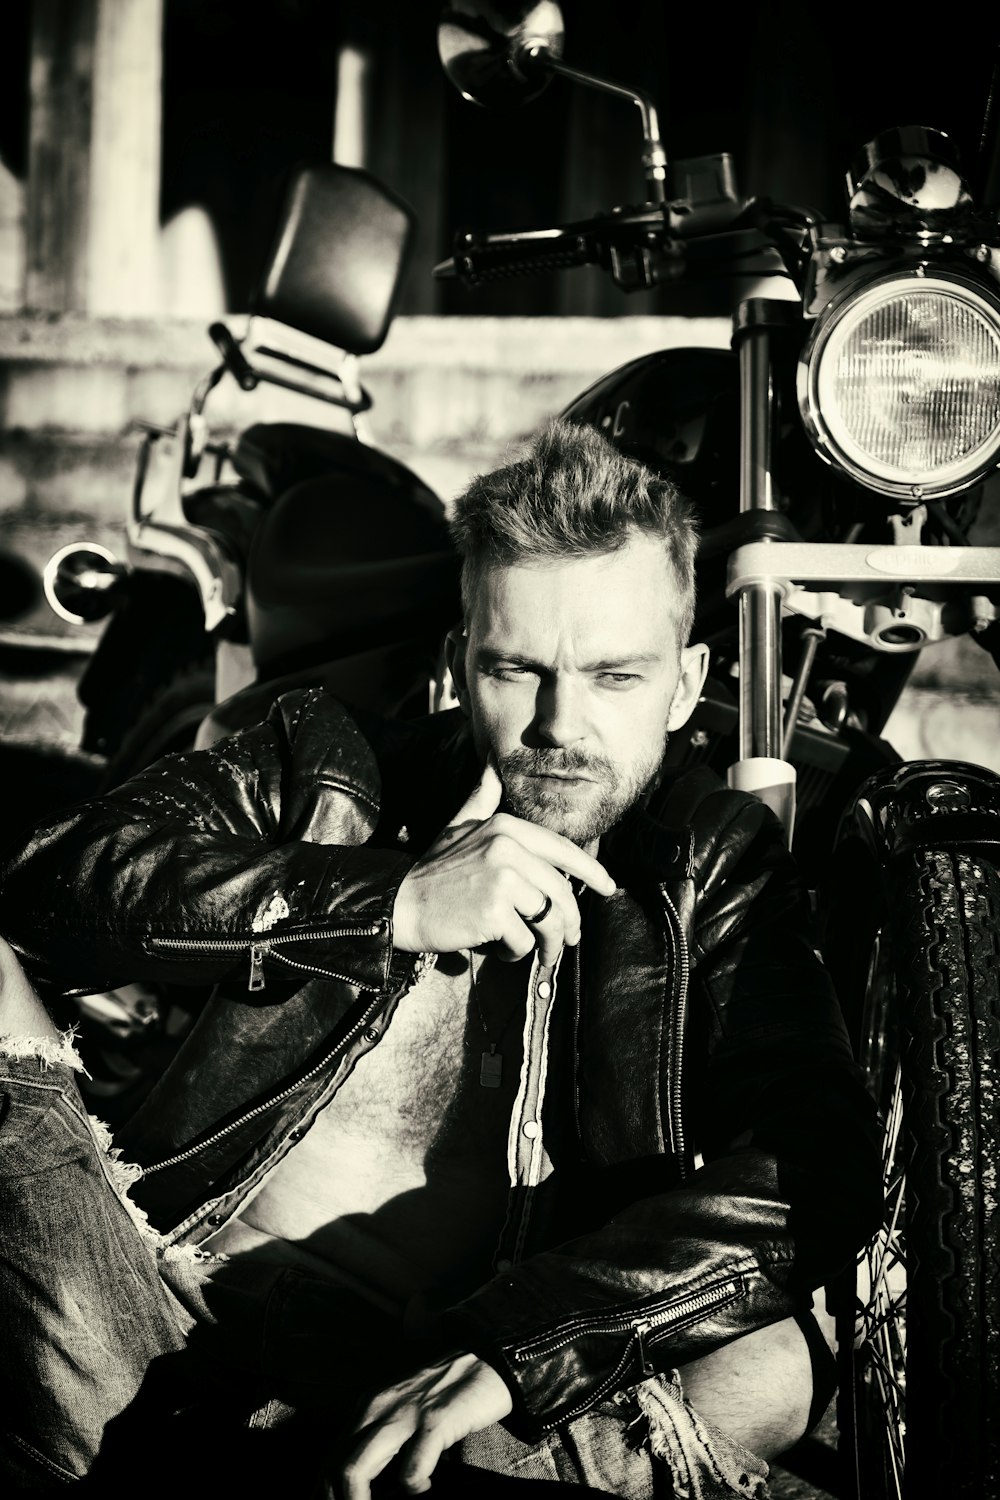 a black and white photo of a man sitting on a motorcycle